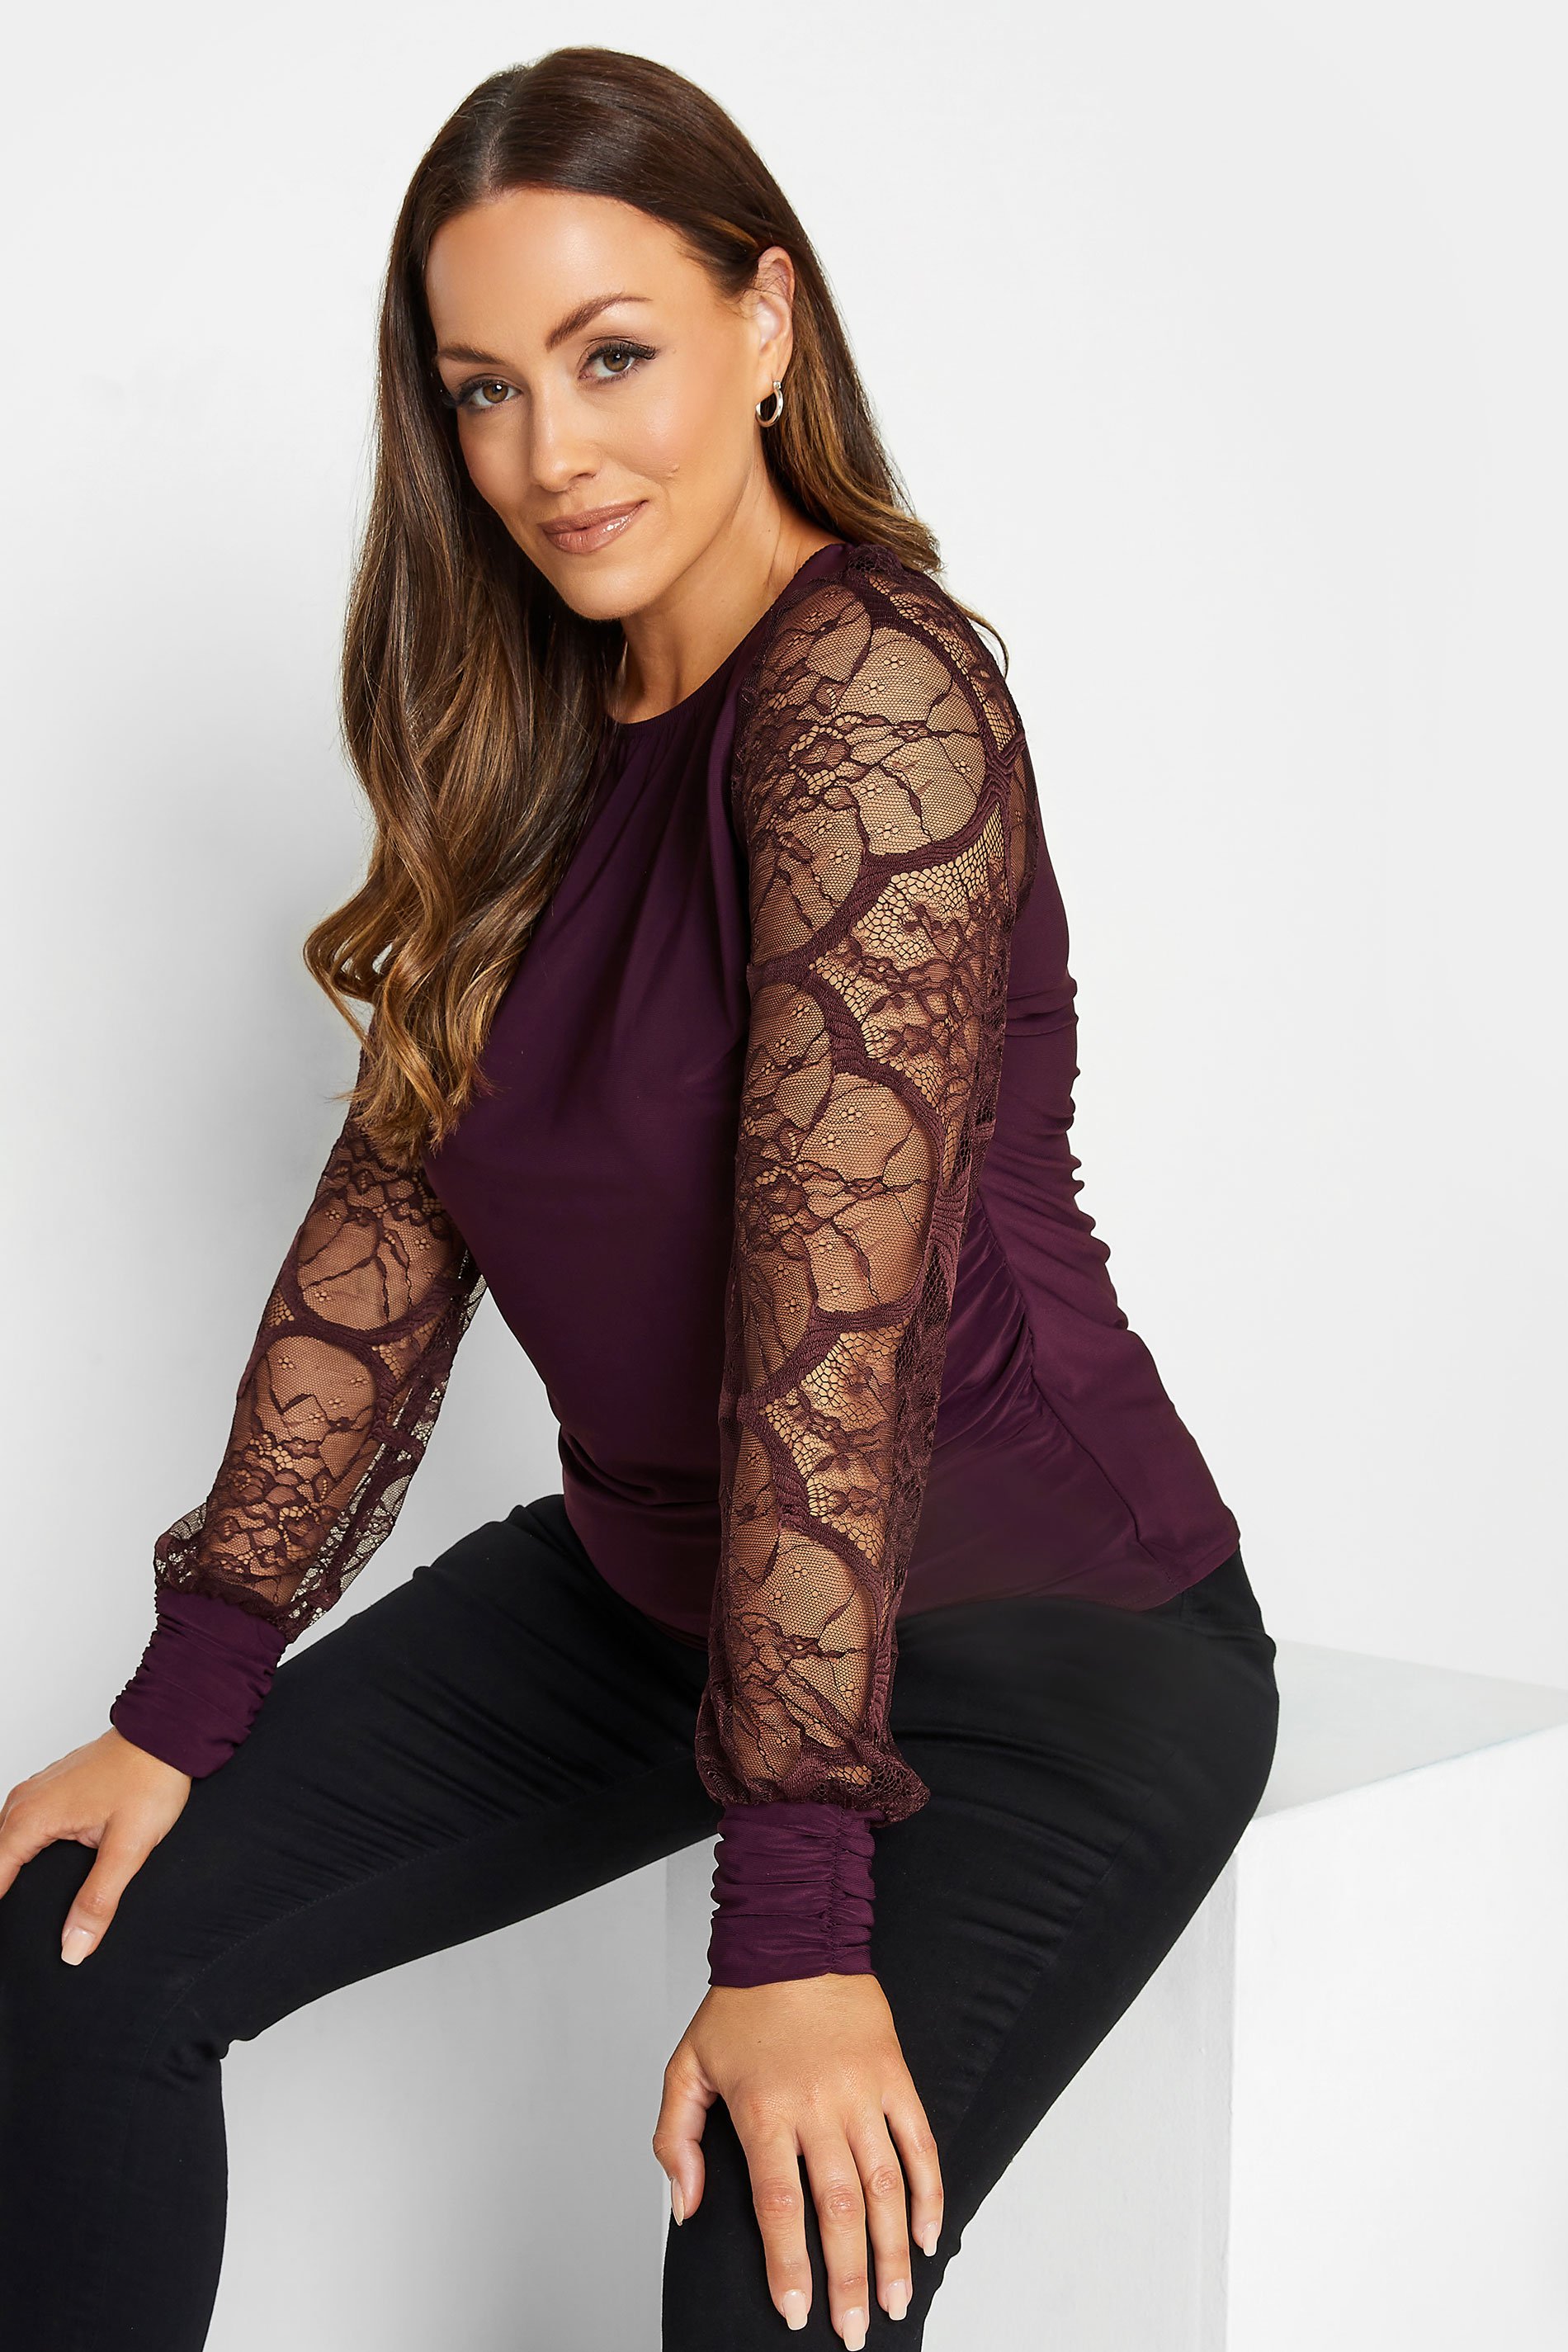 M&Co Burgundy Red Lace Long Sleeve Top | M&Co 1